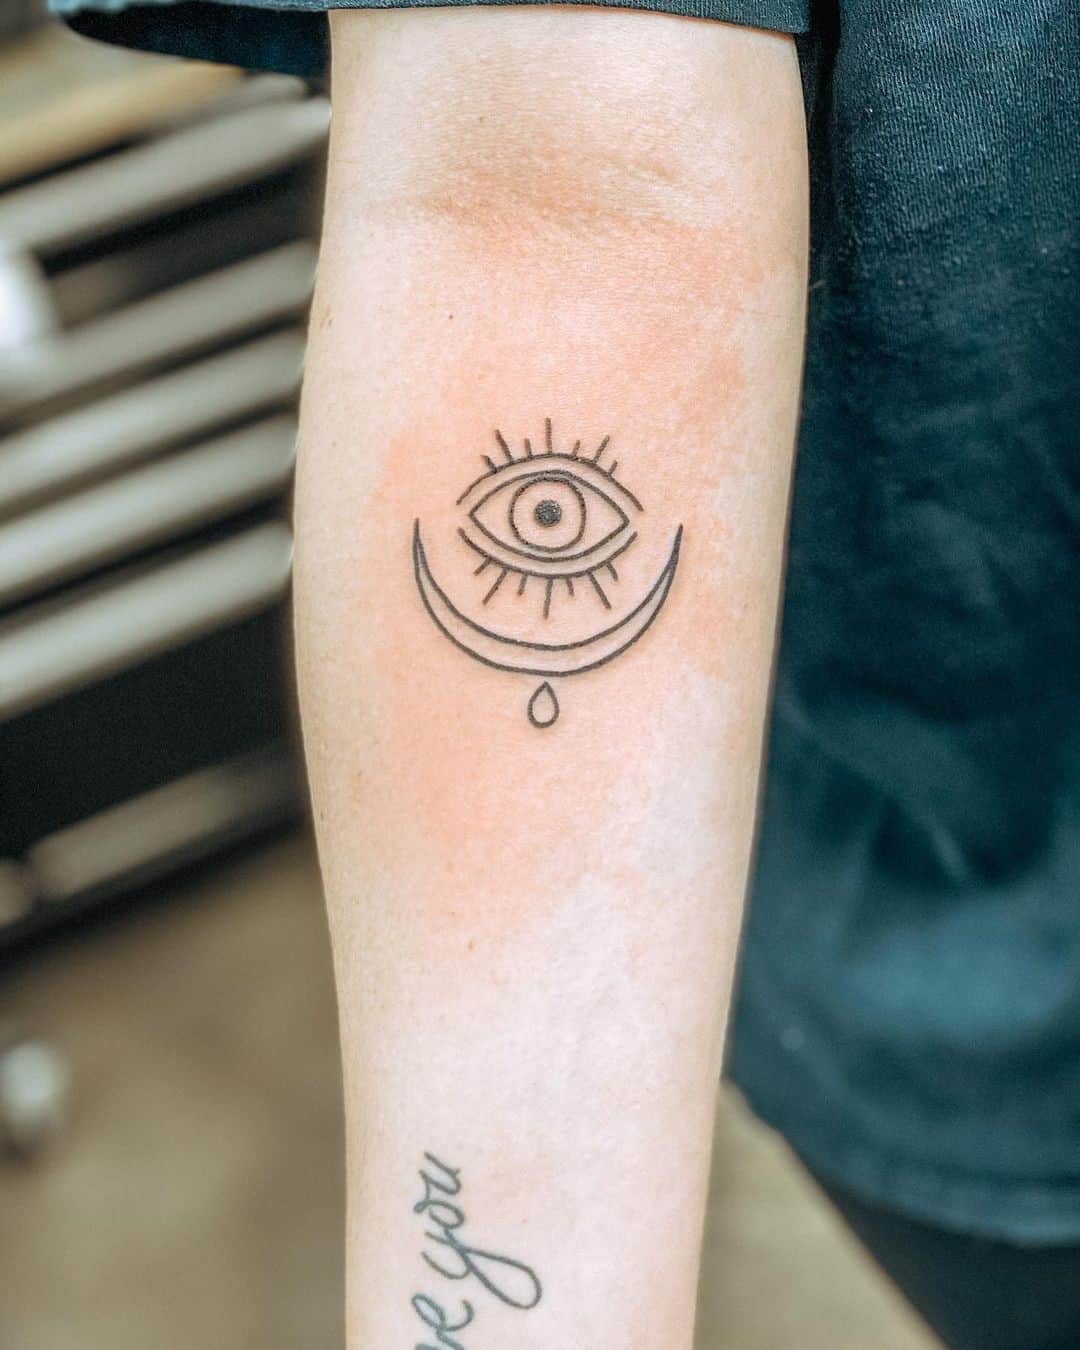 If you want and evil eye tattoo going simple can give you more